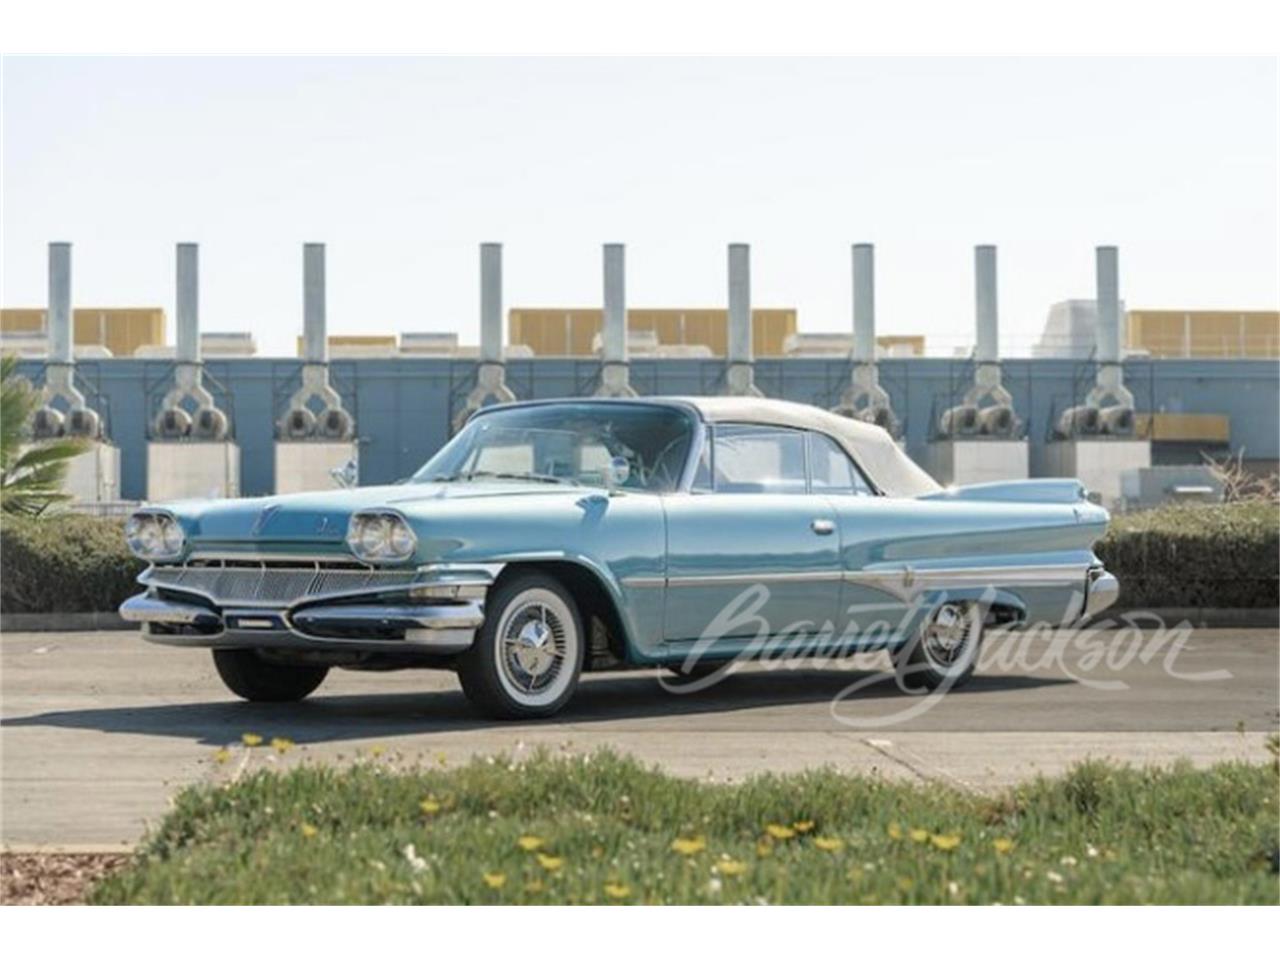 For Sale at Auction: 1960 Dodge Dart in Las Vegas, Nevada for sale in Las Vegas, NV